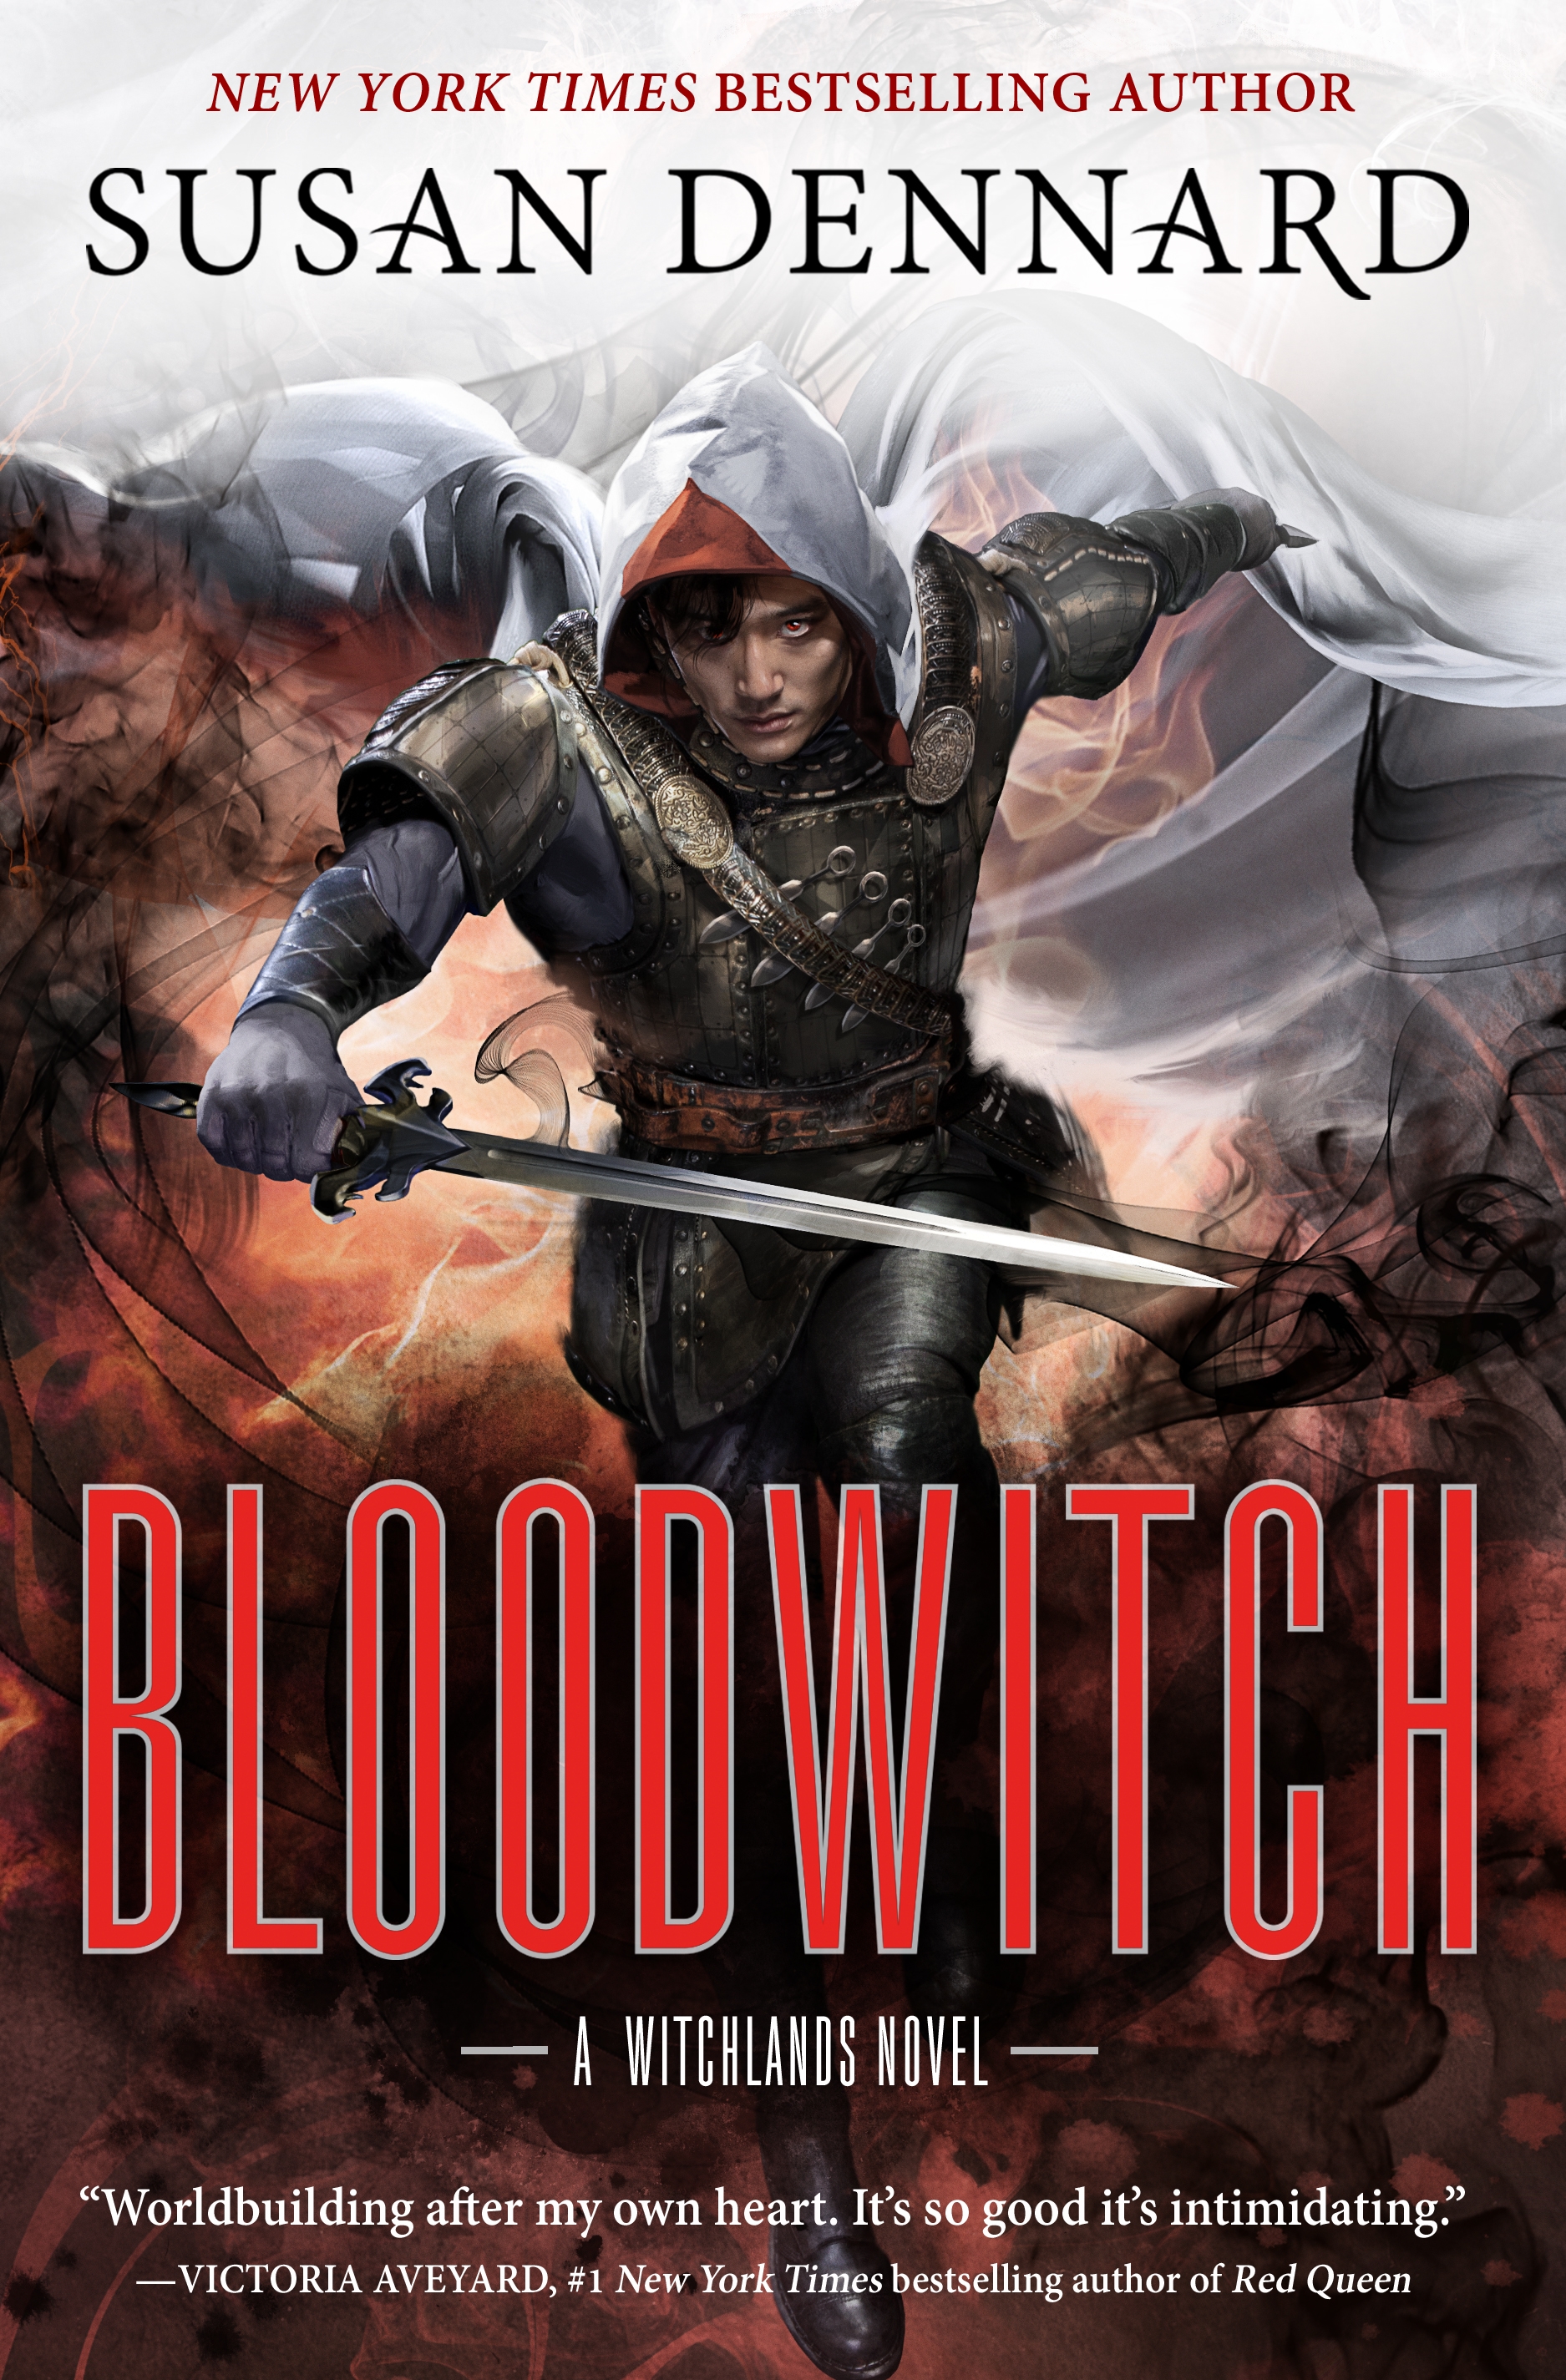 Bloodwitch : The Witchlands by Susan Dennard